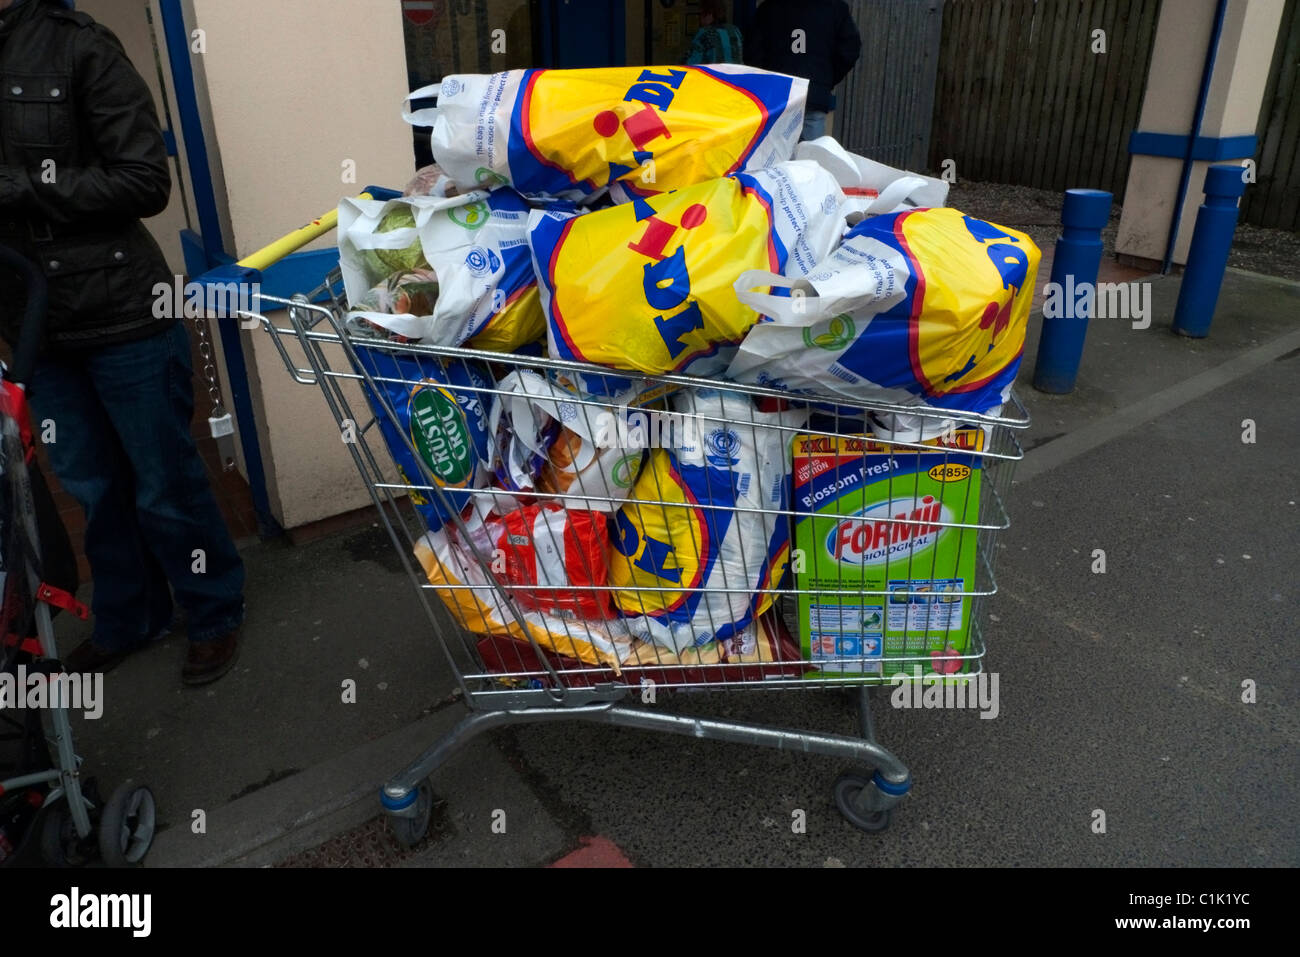 Lidl supermarket shopping trolley overloaded with plastic carrier shopping bags full of groceries outside the store in Great Britain UK   KATHY DEWITT Stock Photo